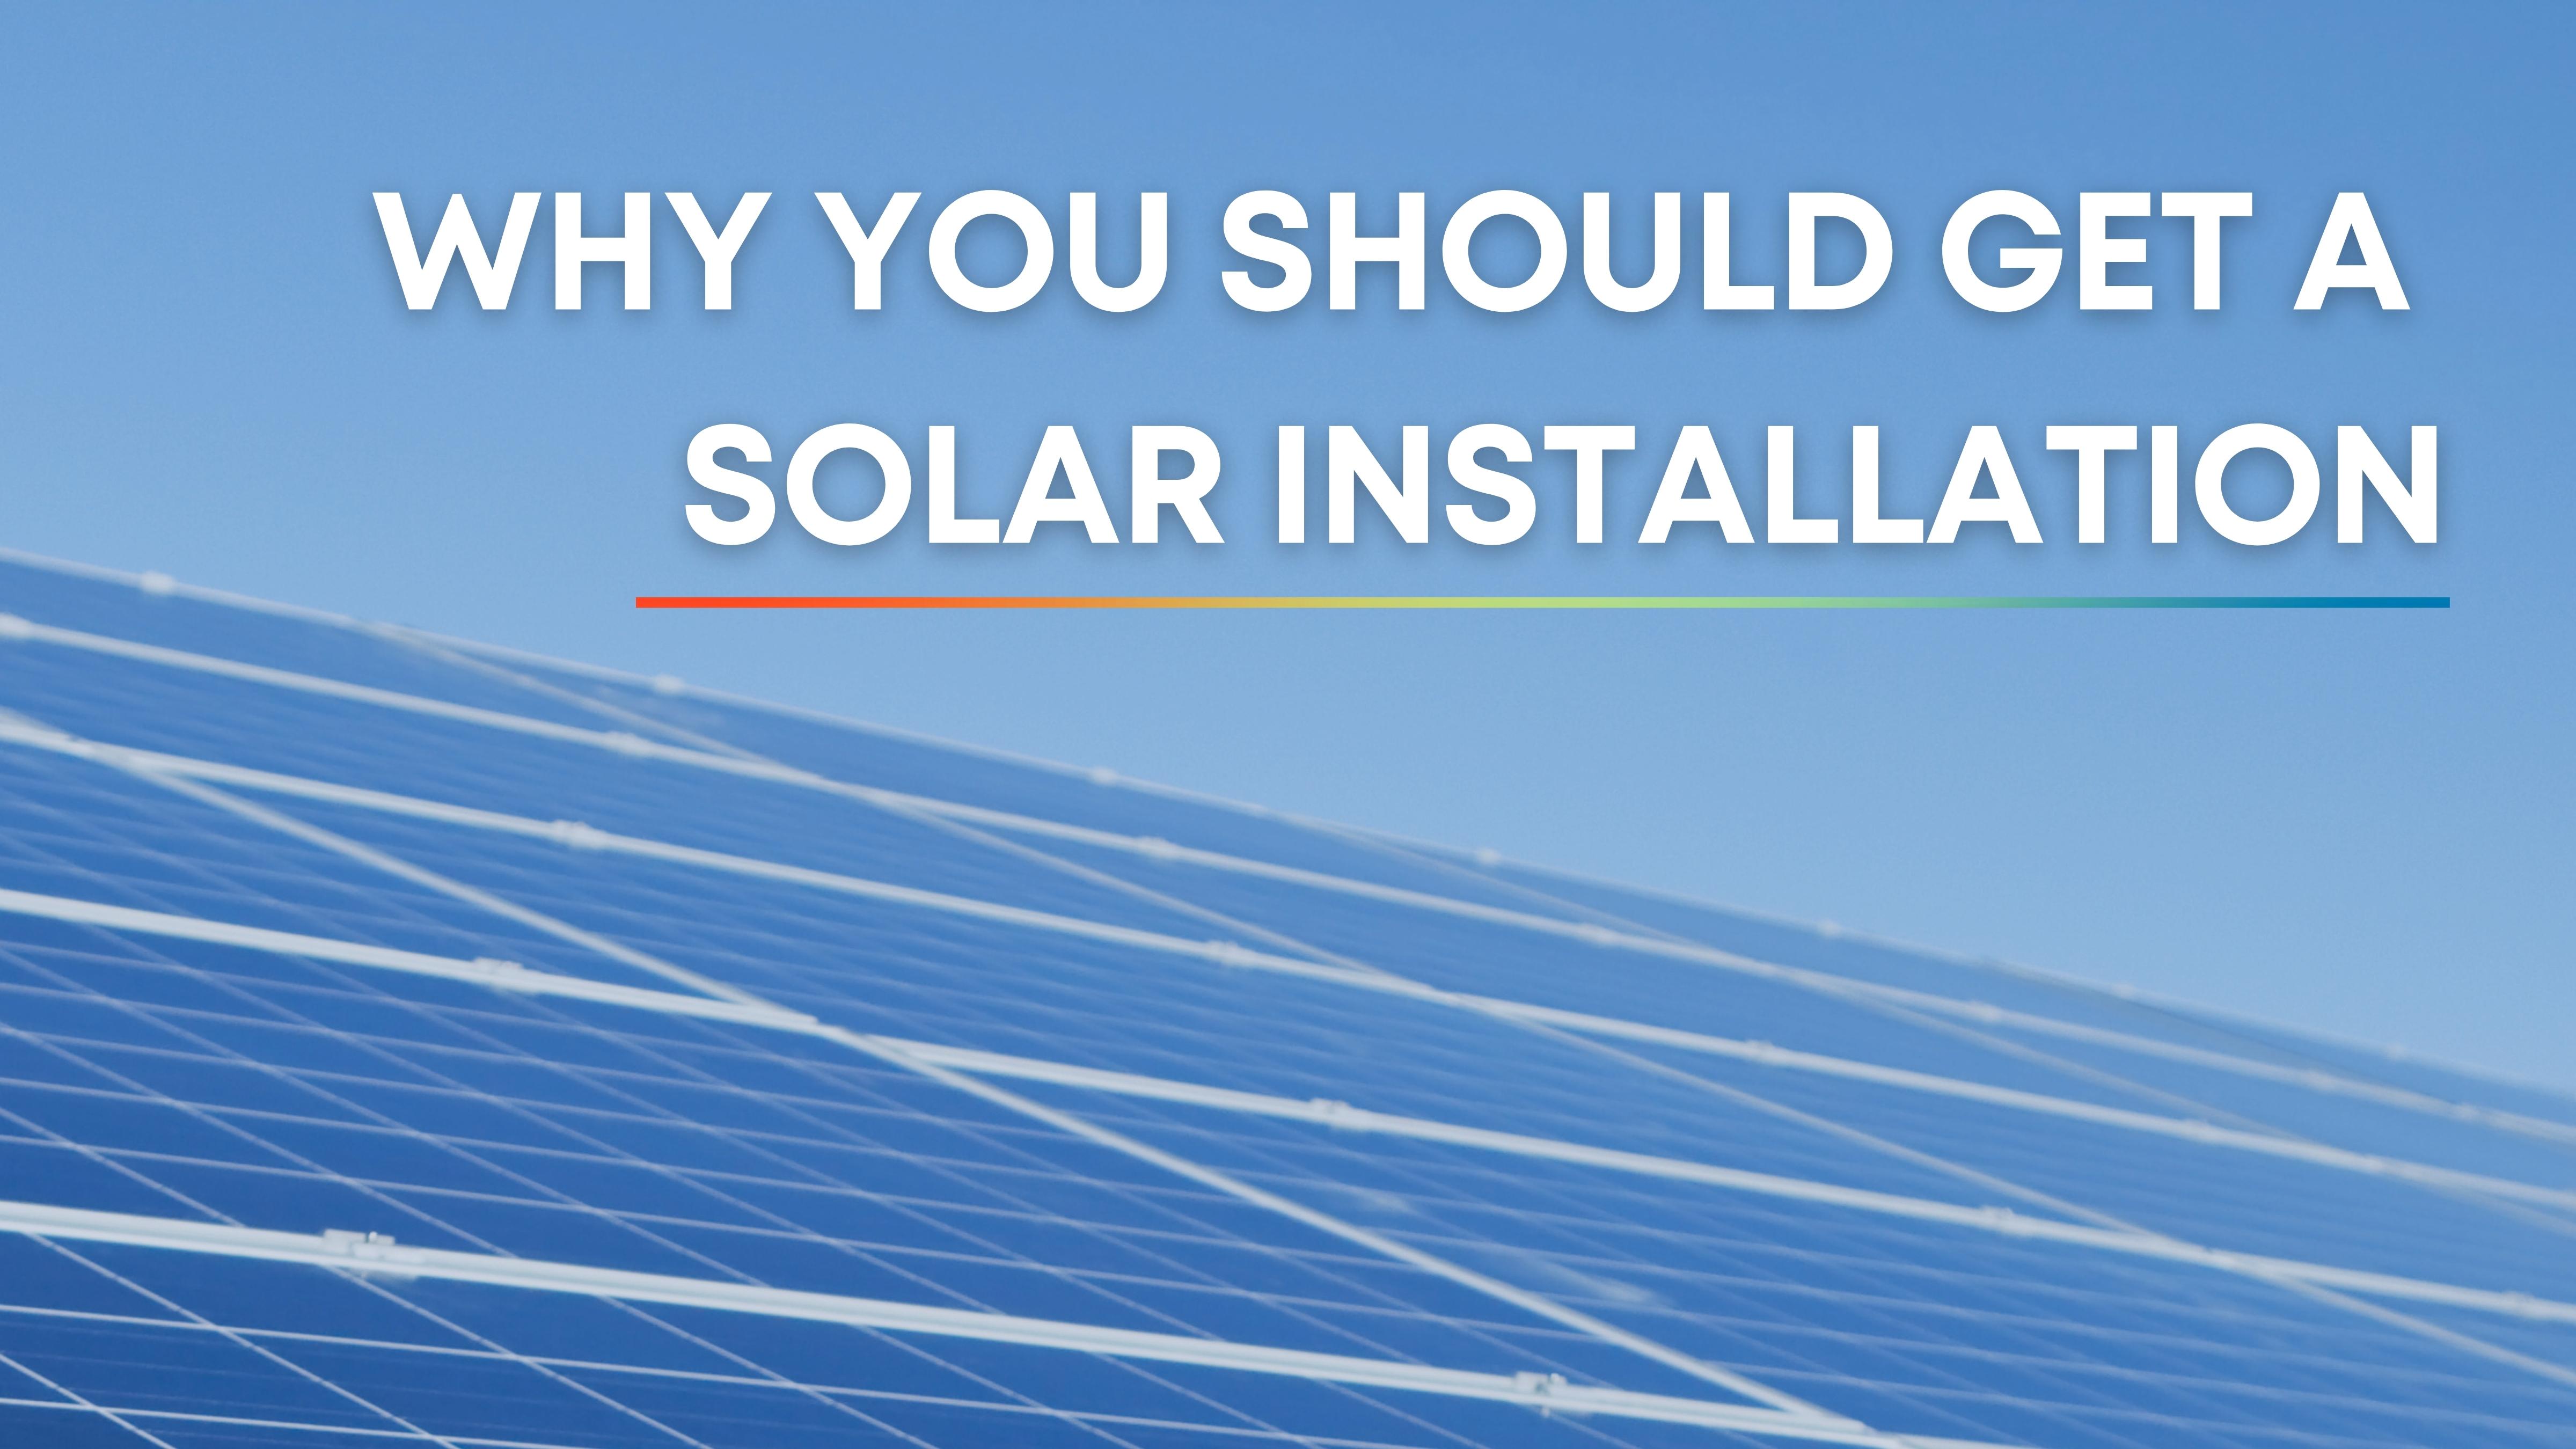 Why you should get a solar installation